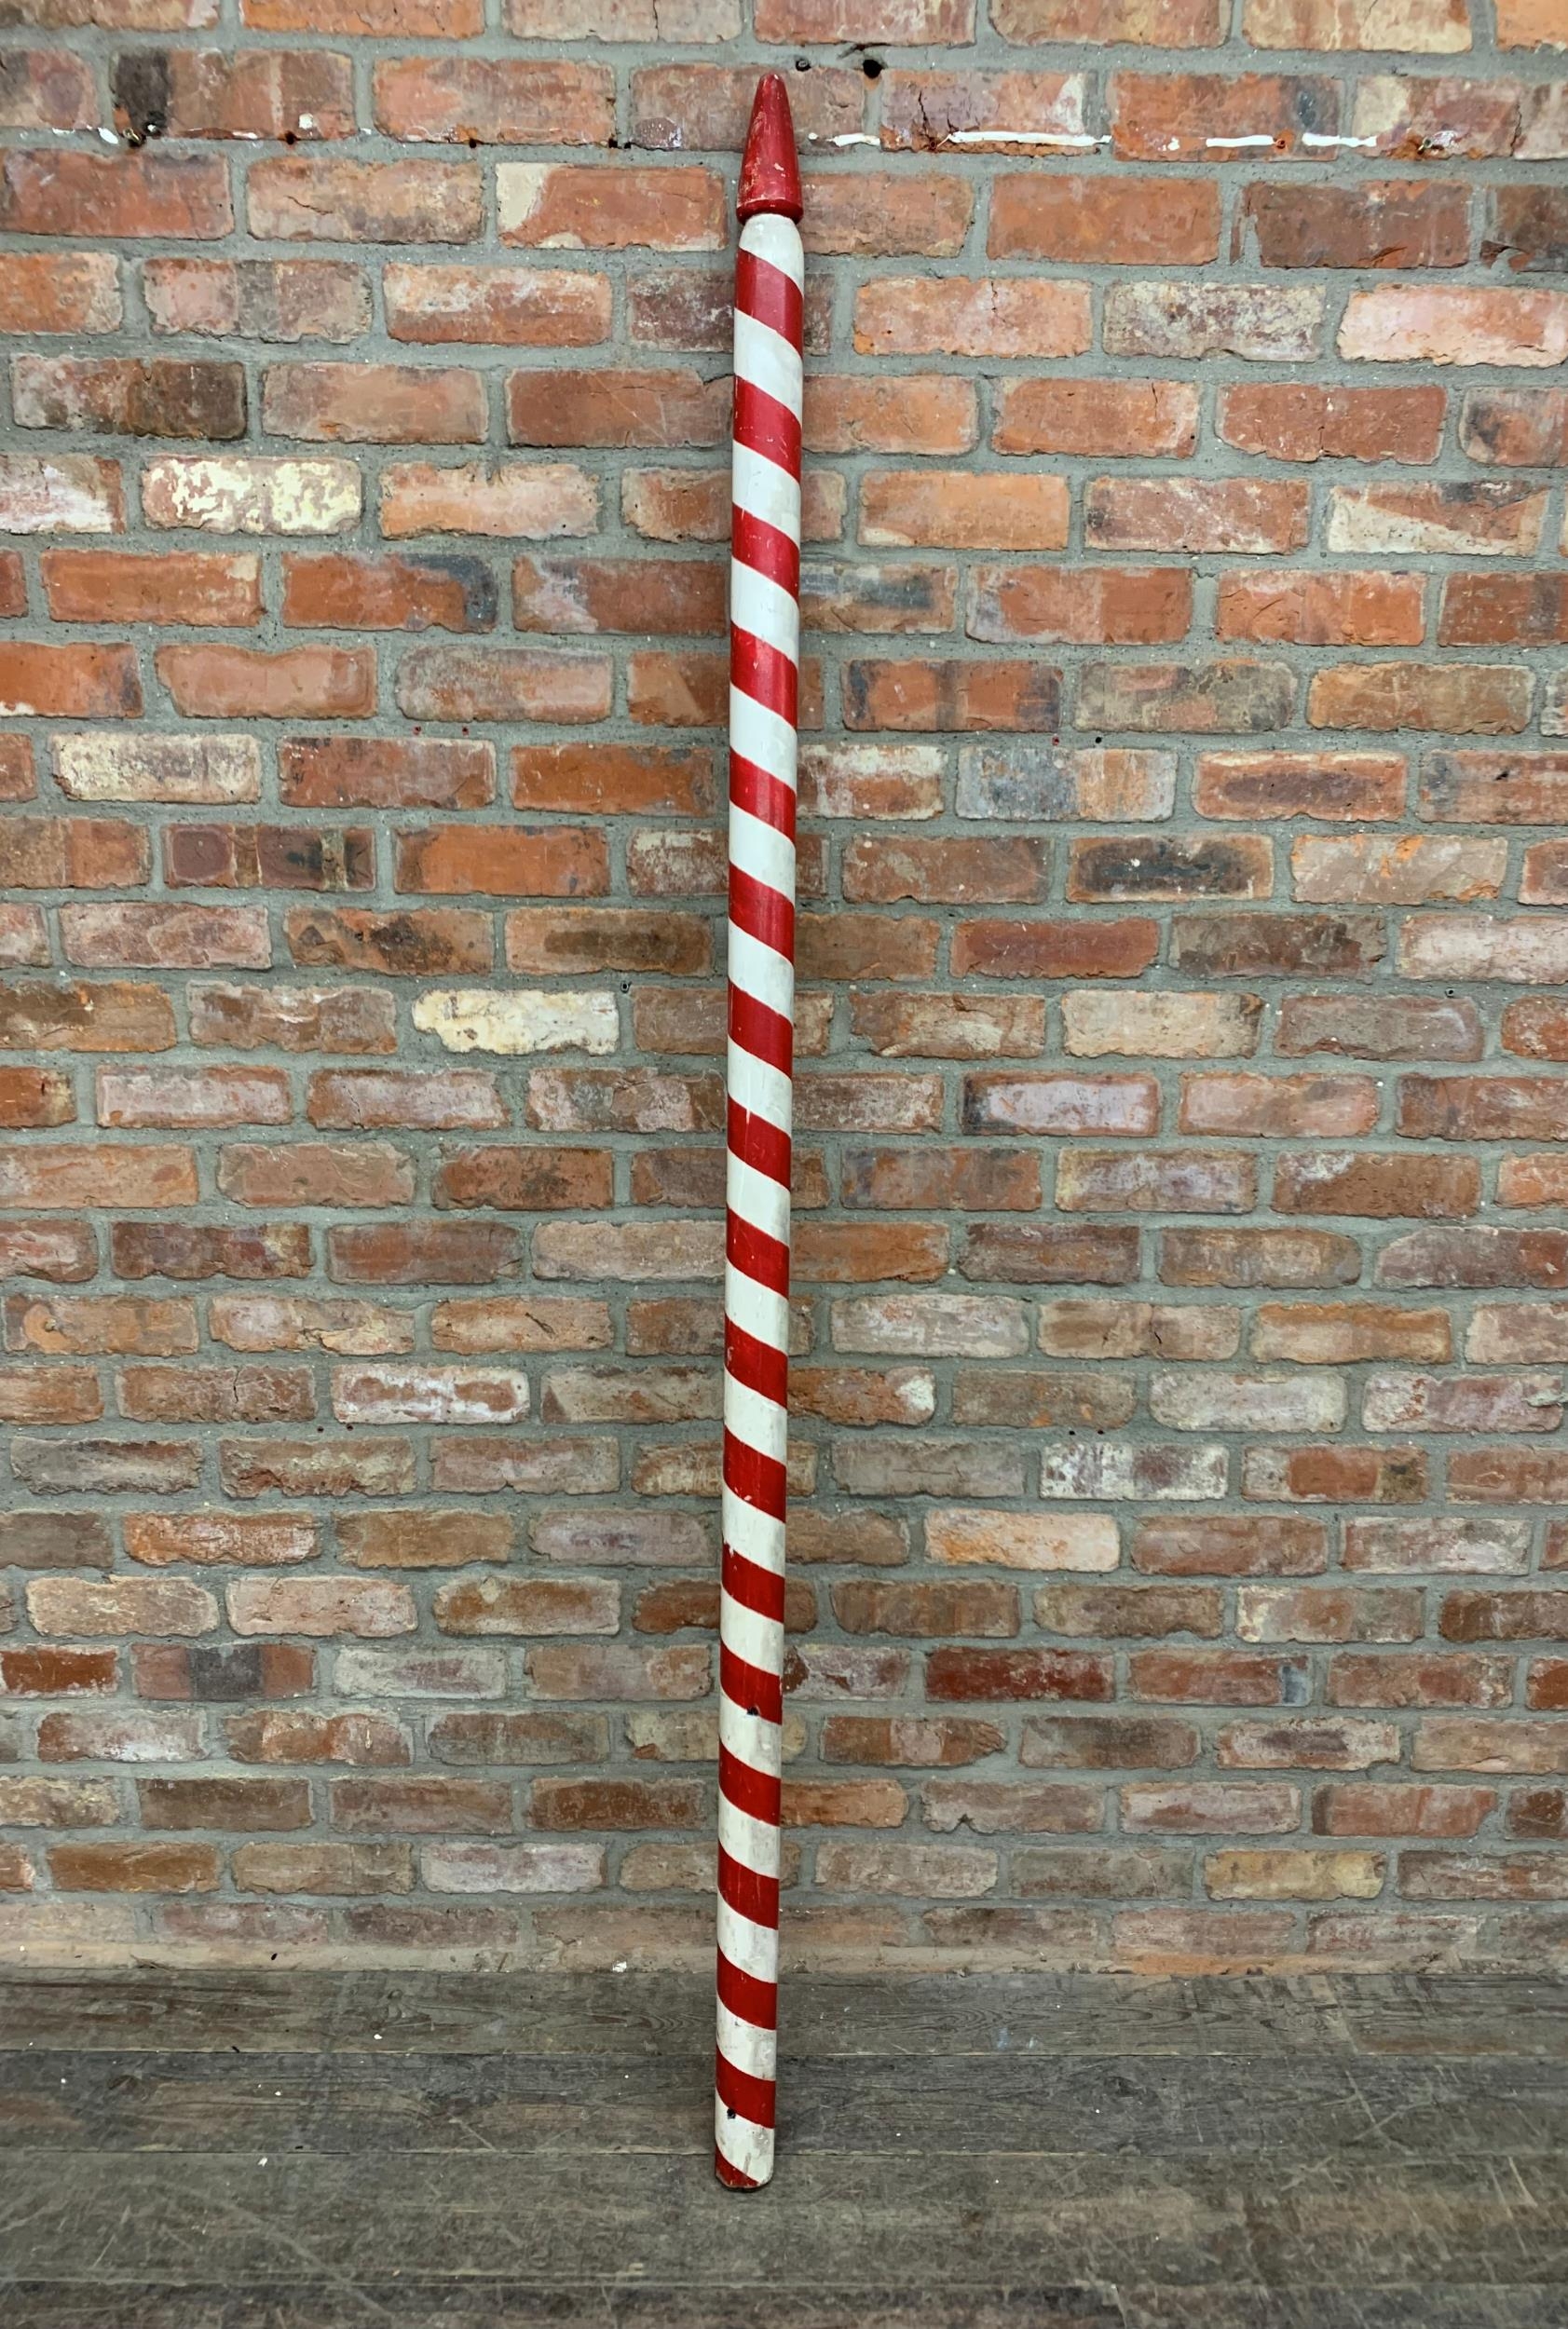 Large hand painted red and white striped wooden barbers pole, H 215cm